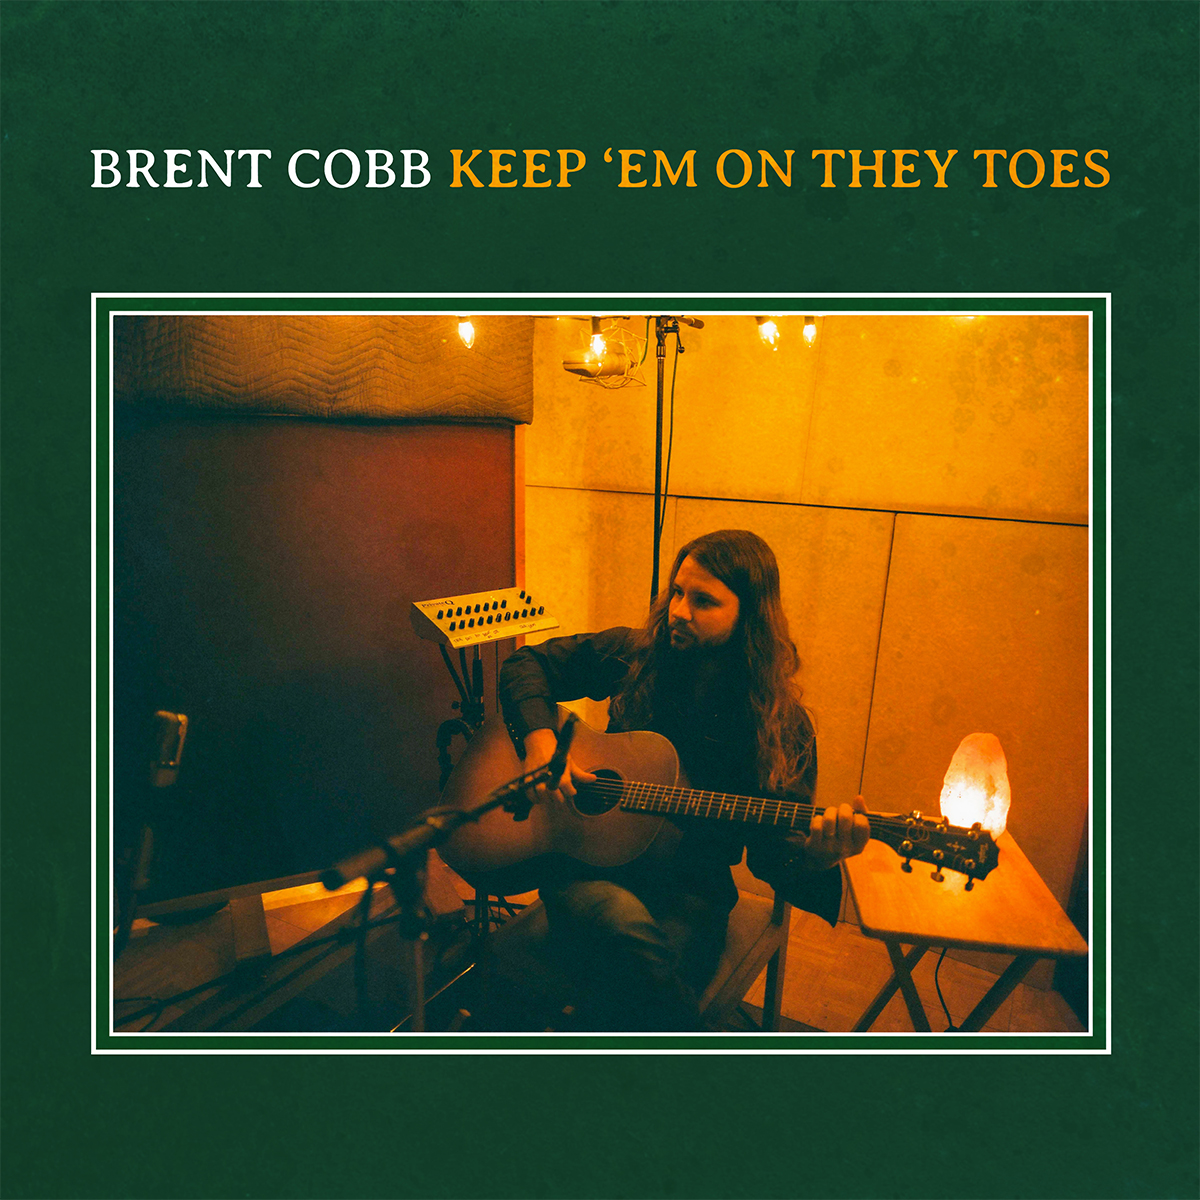 Brent Cobb's "Keep 'Em On they Toes" is out now, October 2nd.